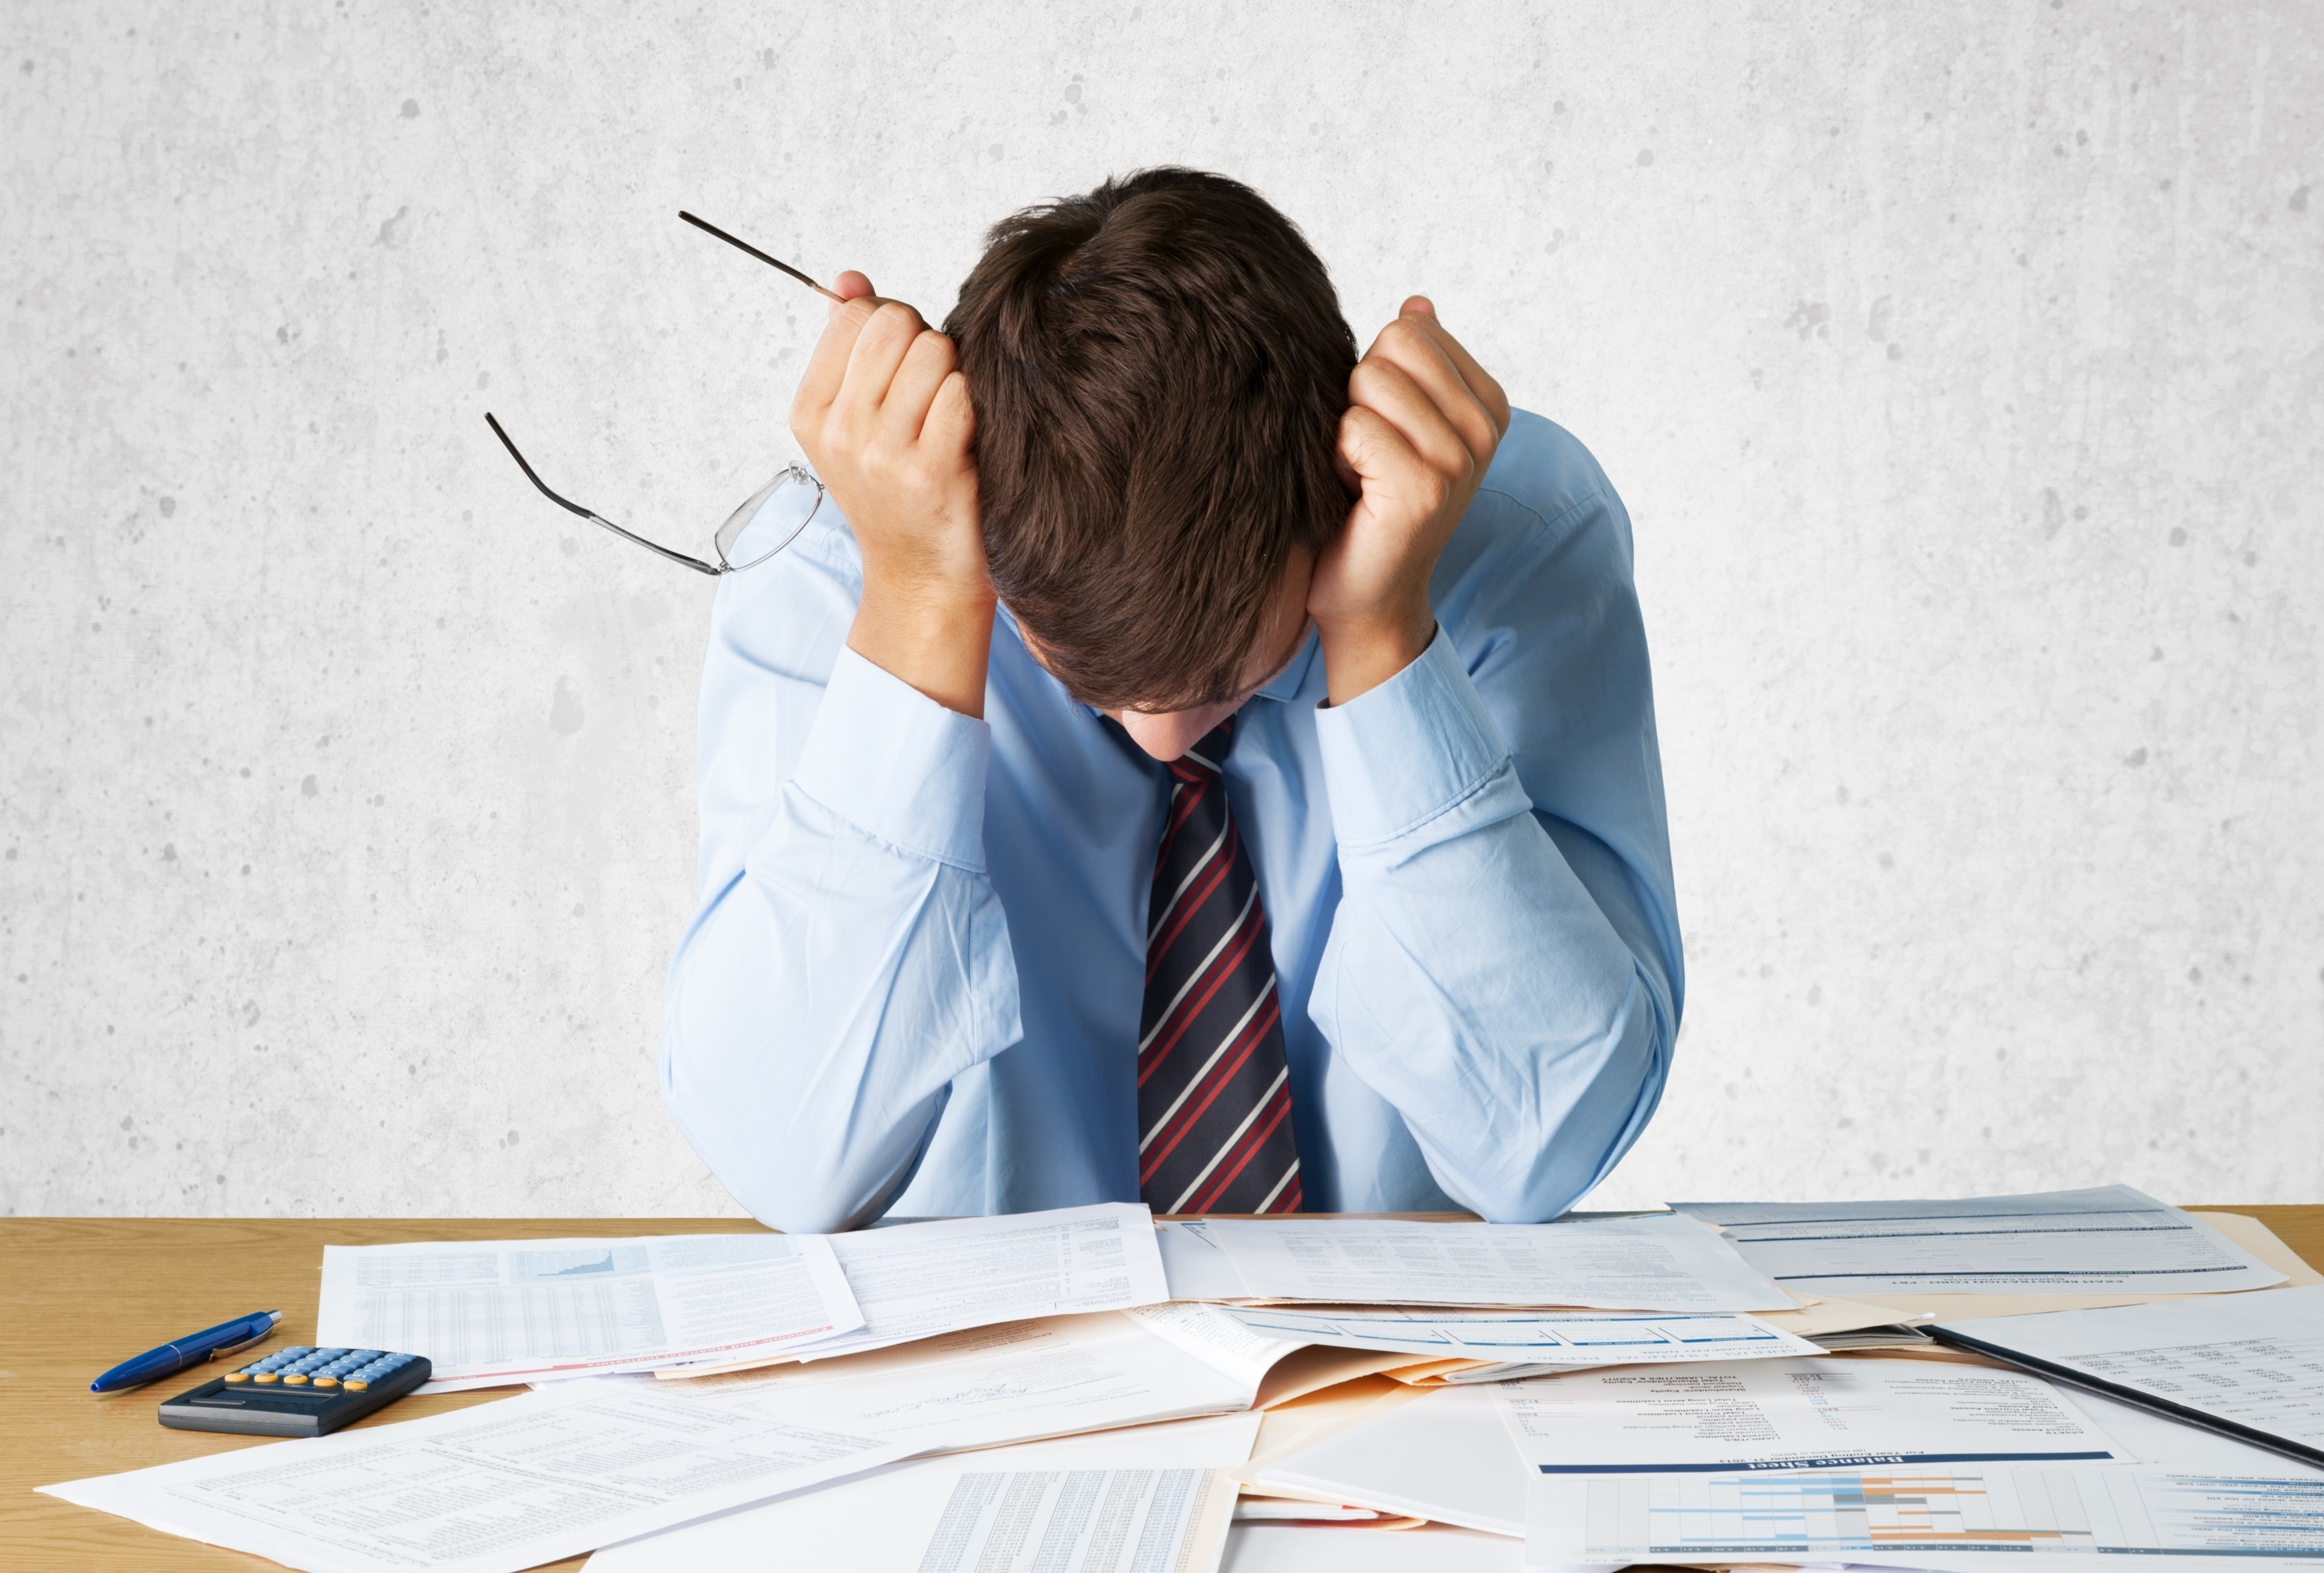 6 Bad Financial Habits That Are Signs You Should Consider Bankruptcy in New Jersey